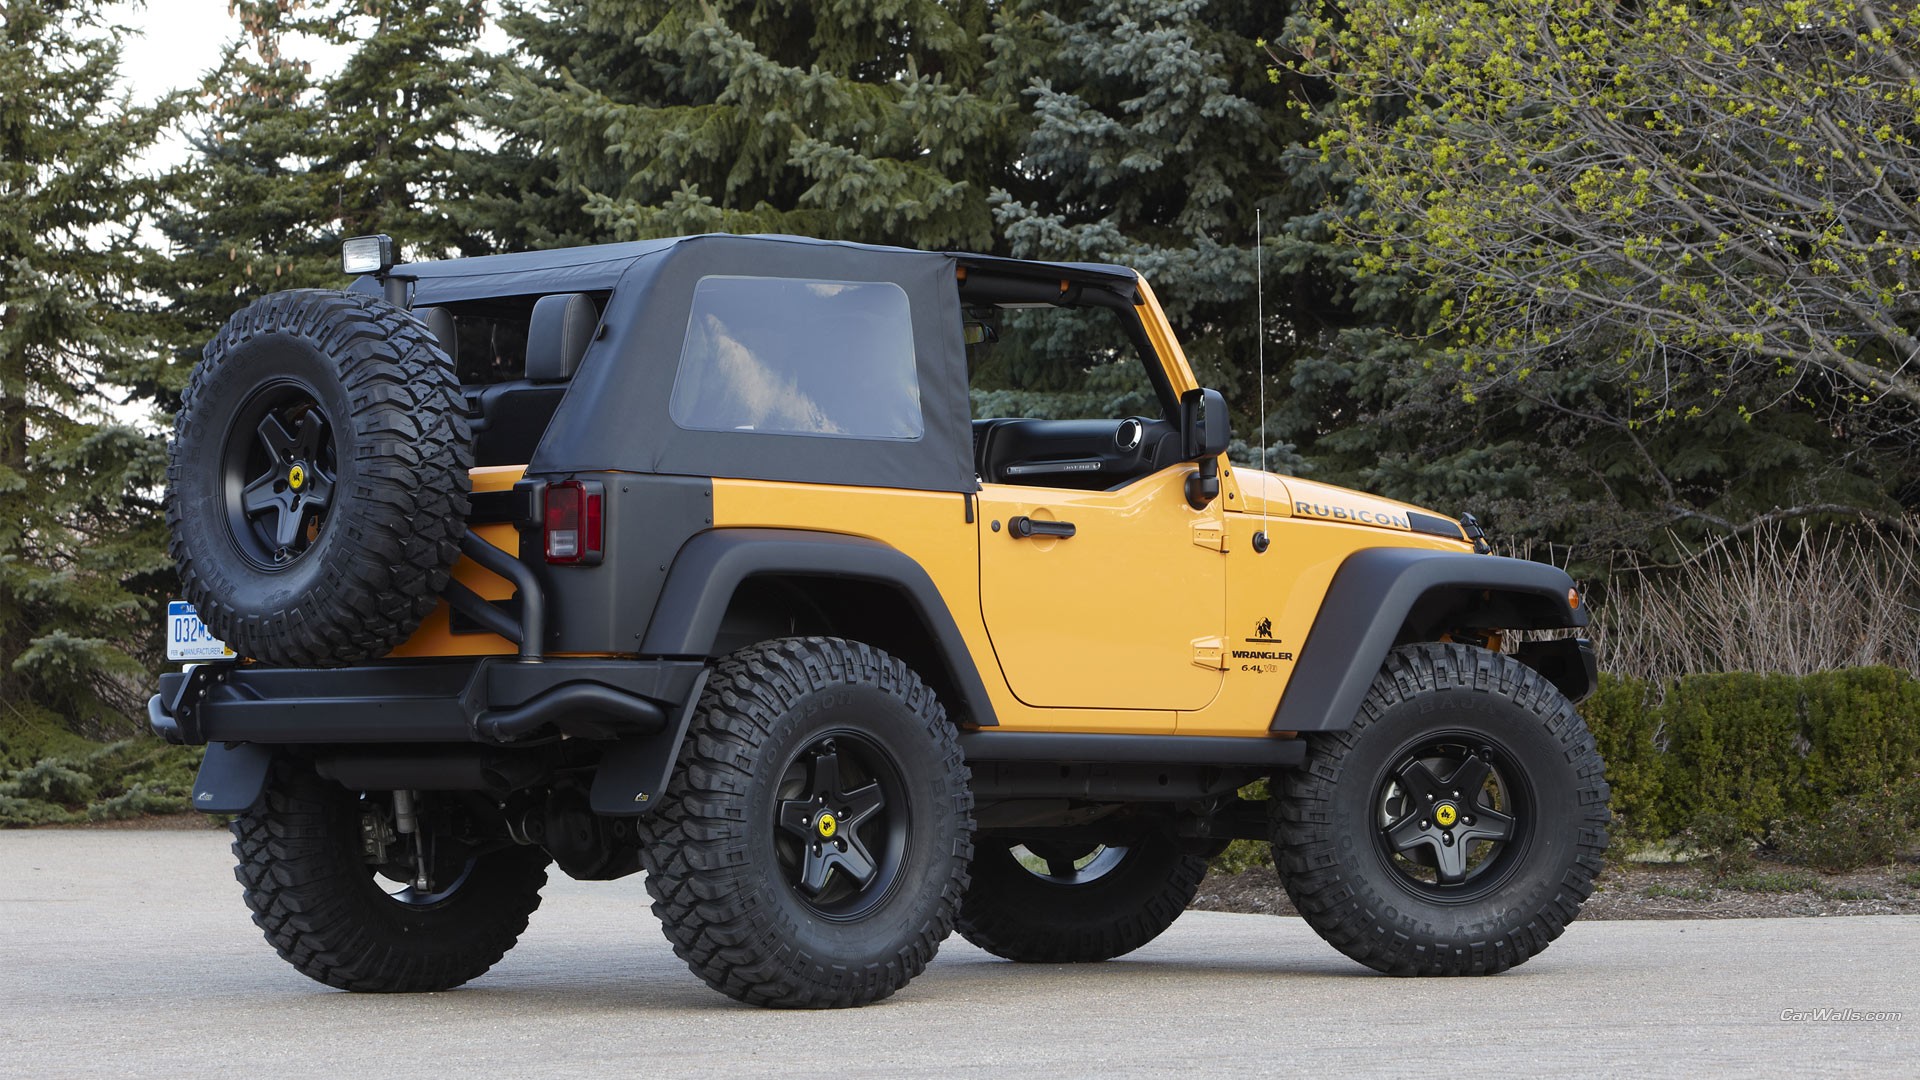 General 1920x1080 Jeep Wrangler Jeep car vehicle yellow cars American cars Stellantis offroad